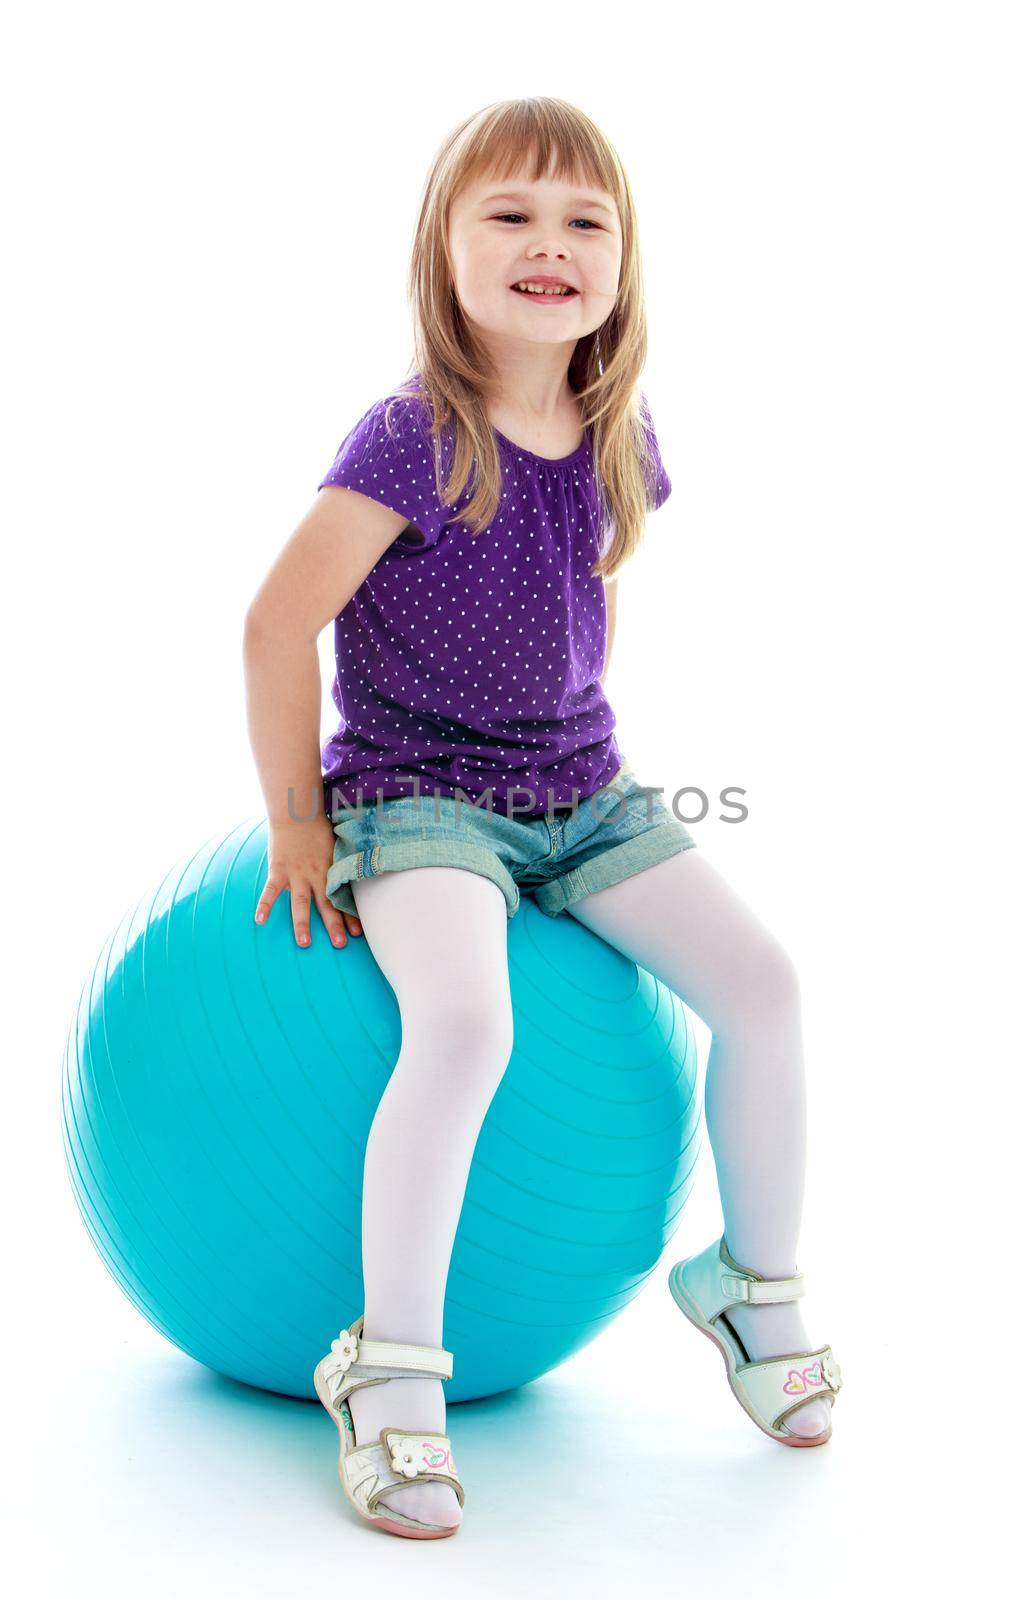 charming little girl in blue shorts playing with a big blue ball. Happy childhood, fashion, autumnal mood concept. Isolated on white background